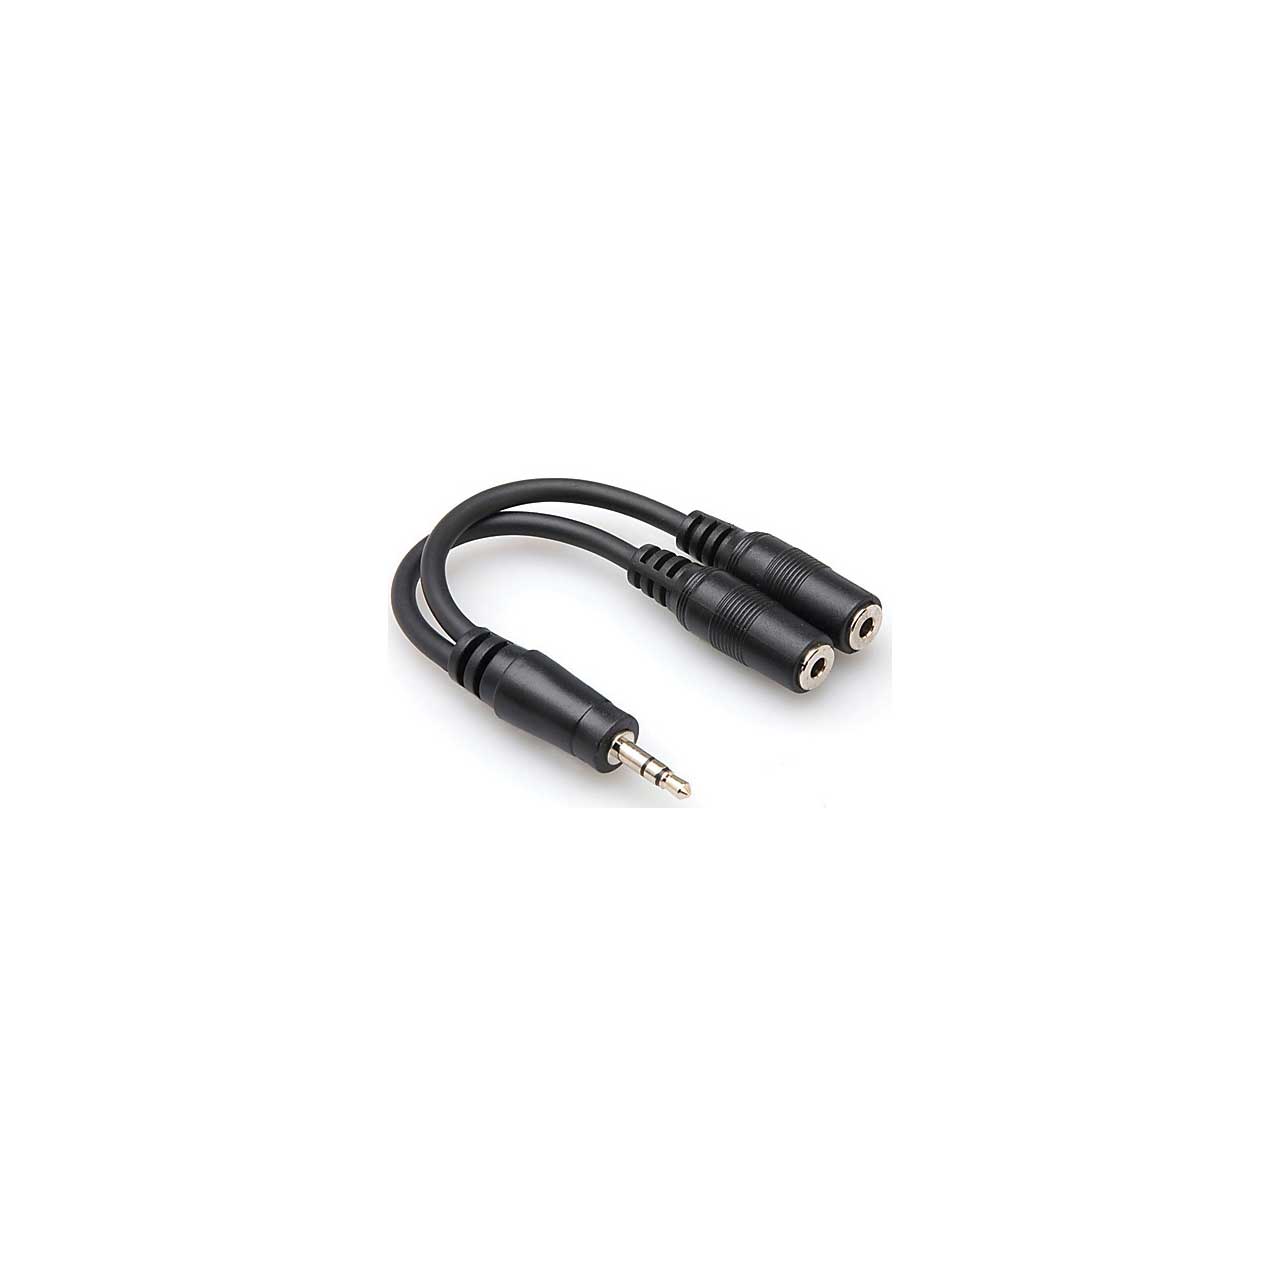 Y-MPS-2MFS Stereo 3.5mm Mini Male to Dual Stereo 3.5mm Mini Female Y-Cable 6 In